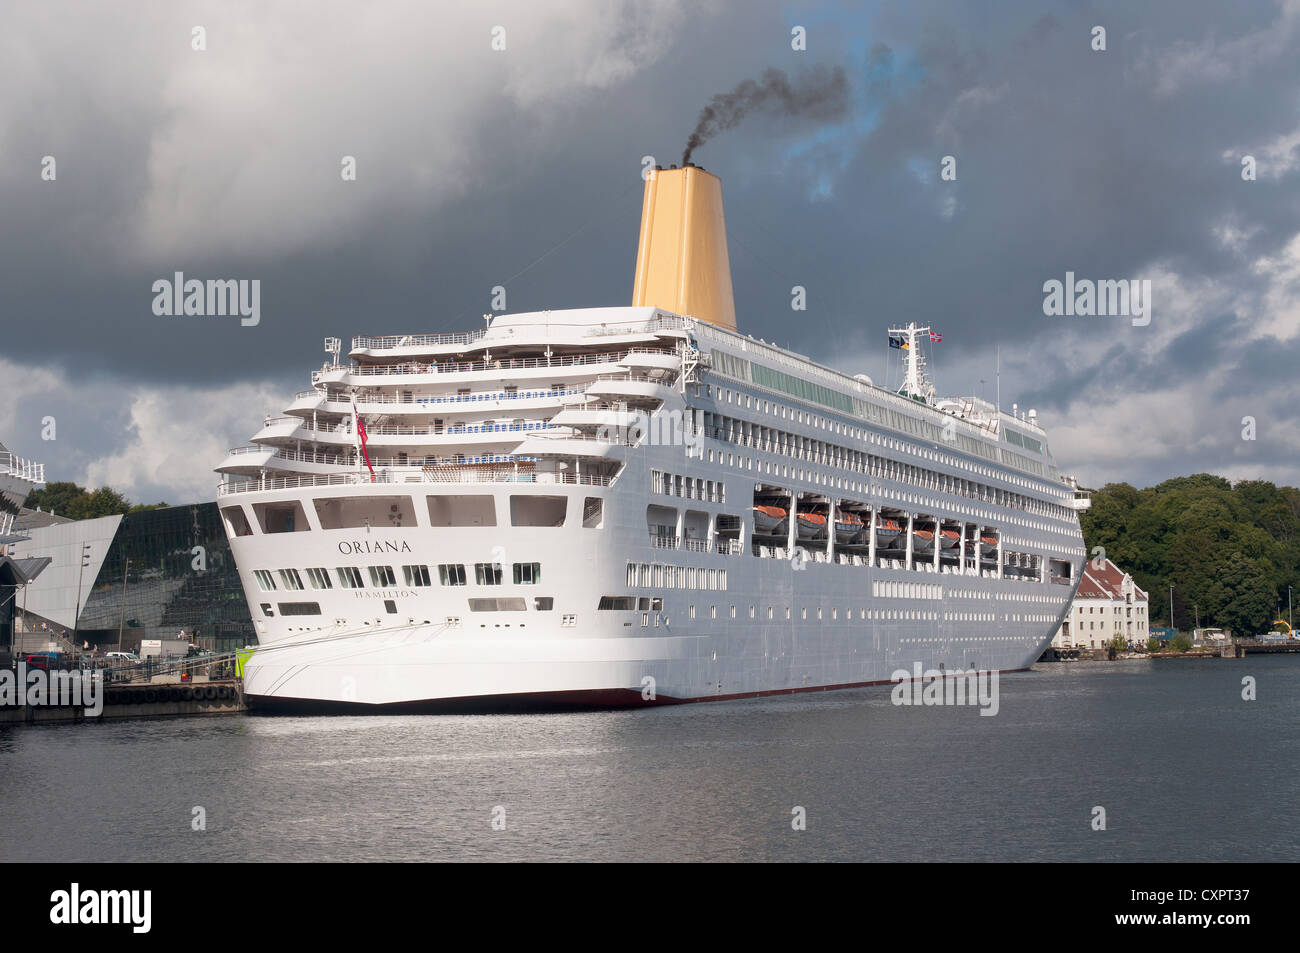 The P&O Cruise Ship, Oriana, docked in the port of Stavanger, Norway Stock Photo